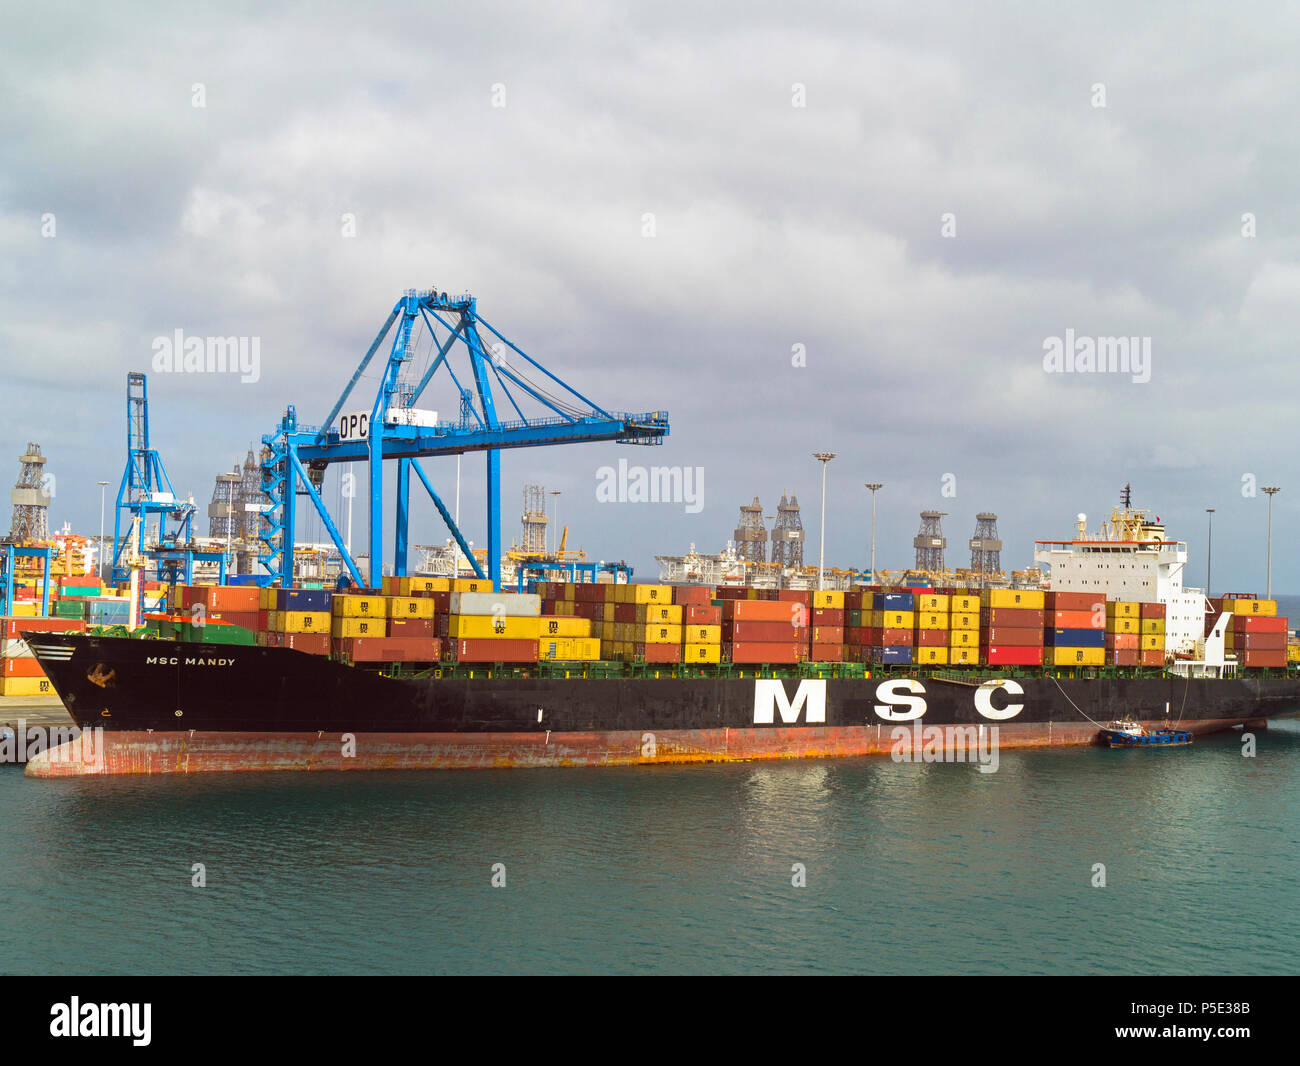 MSC container ship MANDY at the busy port of  Las Palmas de Gran Canaria, Canary Islands, Europe Stock Photo